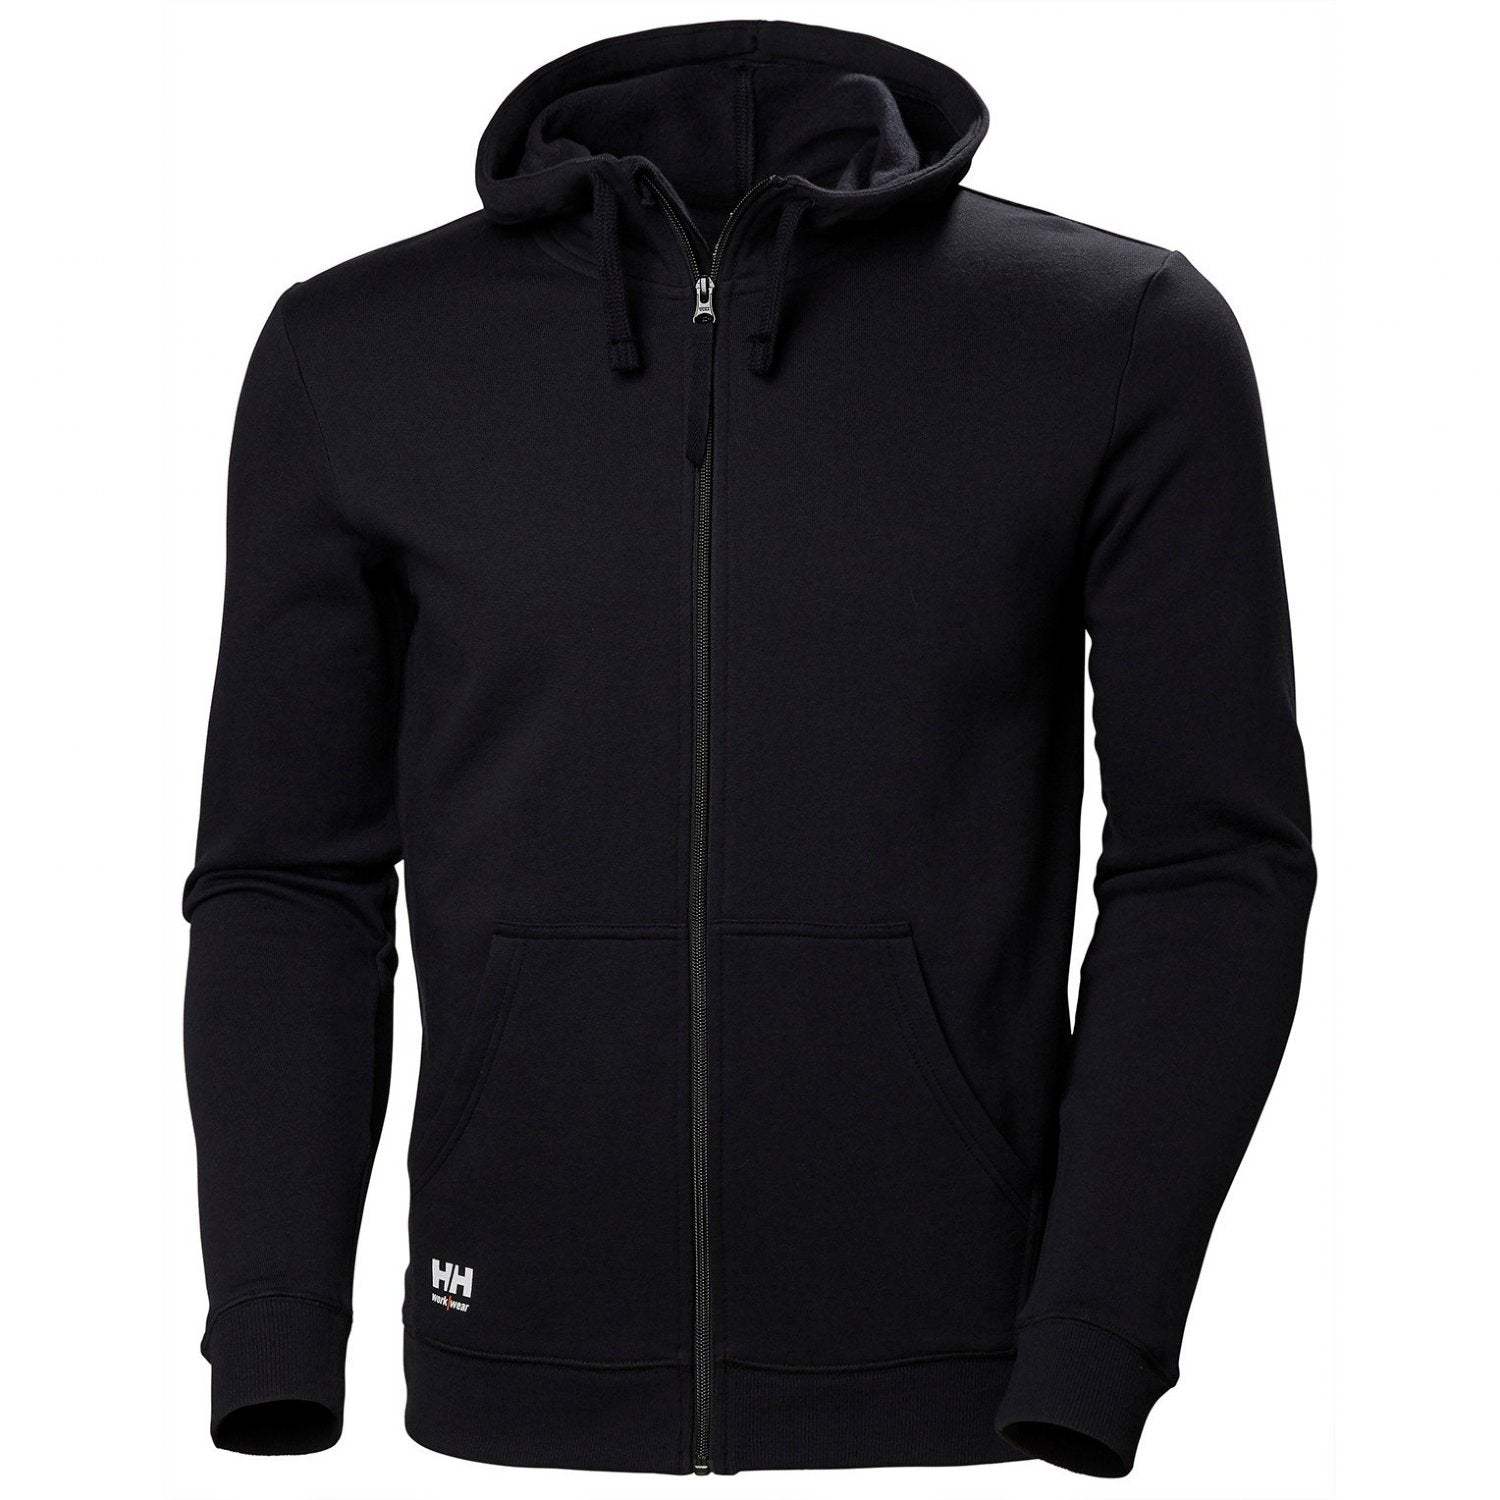 Helly Hansen Men's Manchester Zip Hoodie - The Luxury Promotional Gifts Company Limited